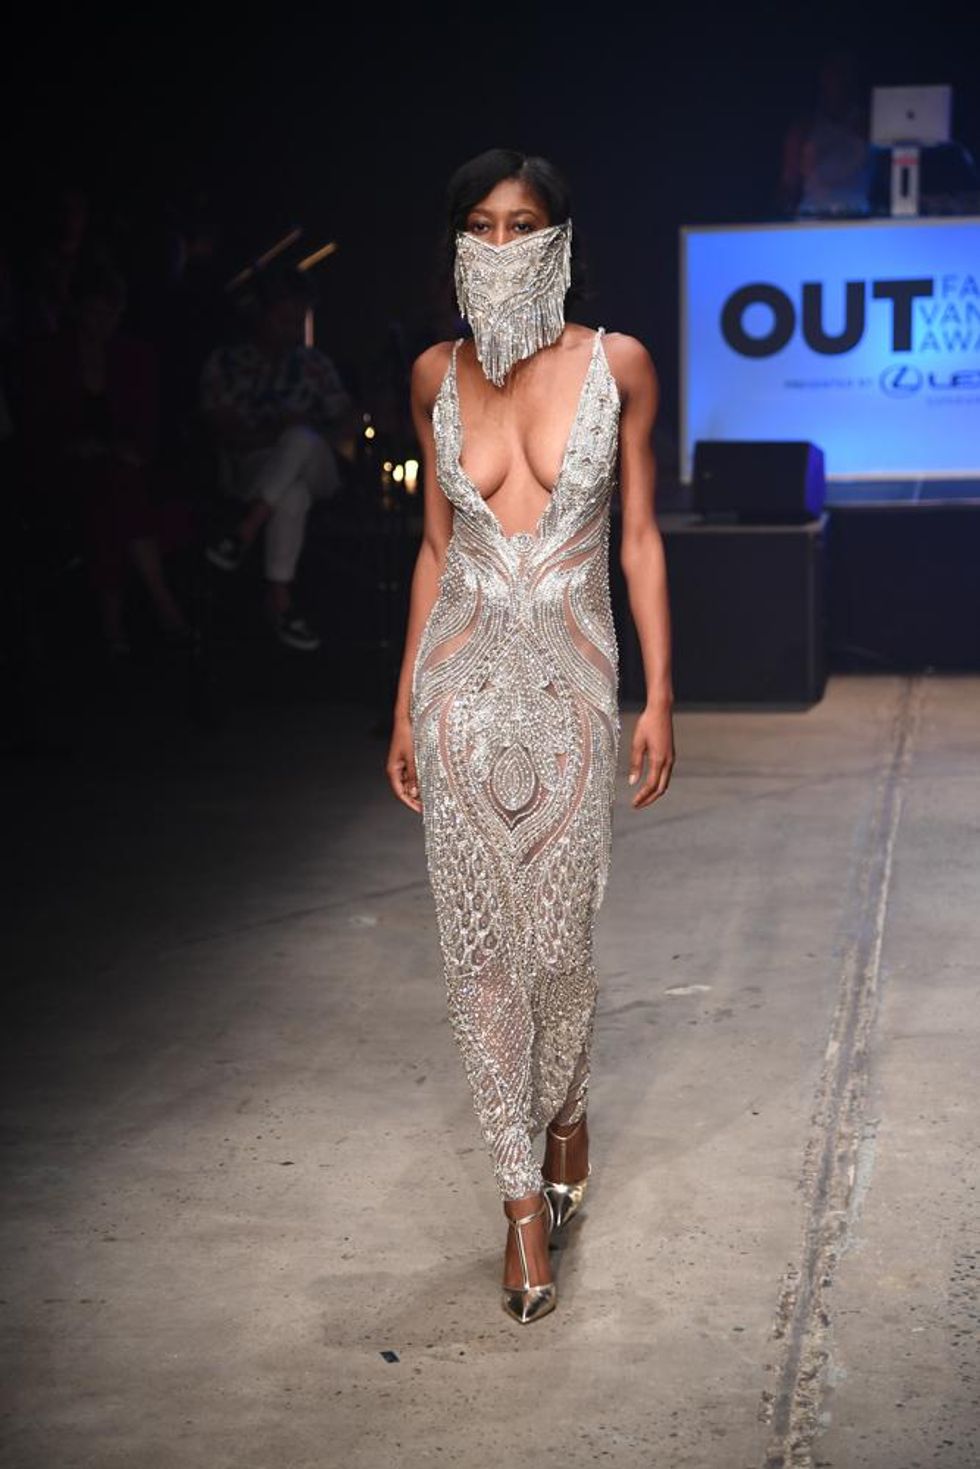 Grayling Purnell's model on the runway